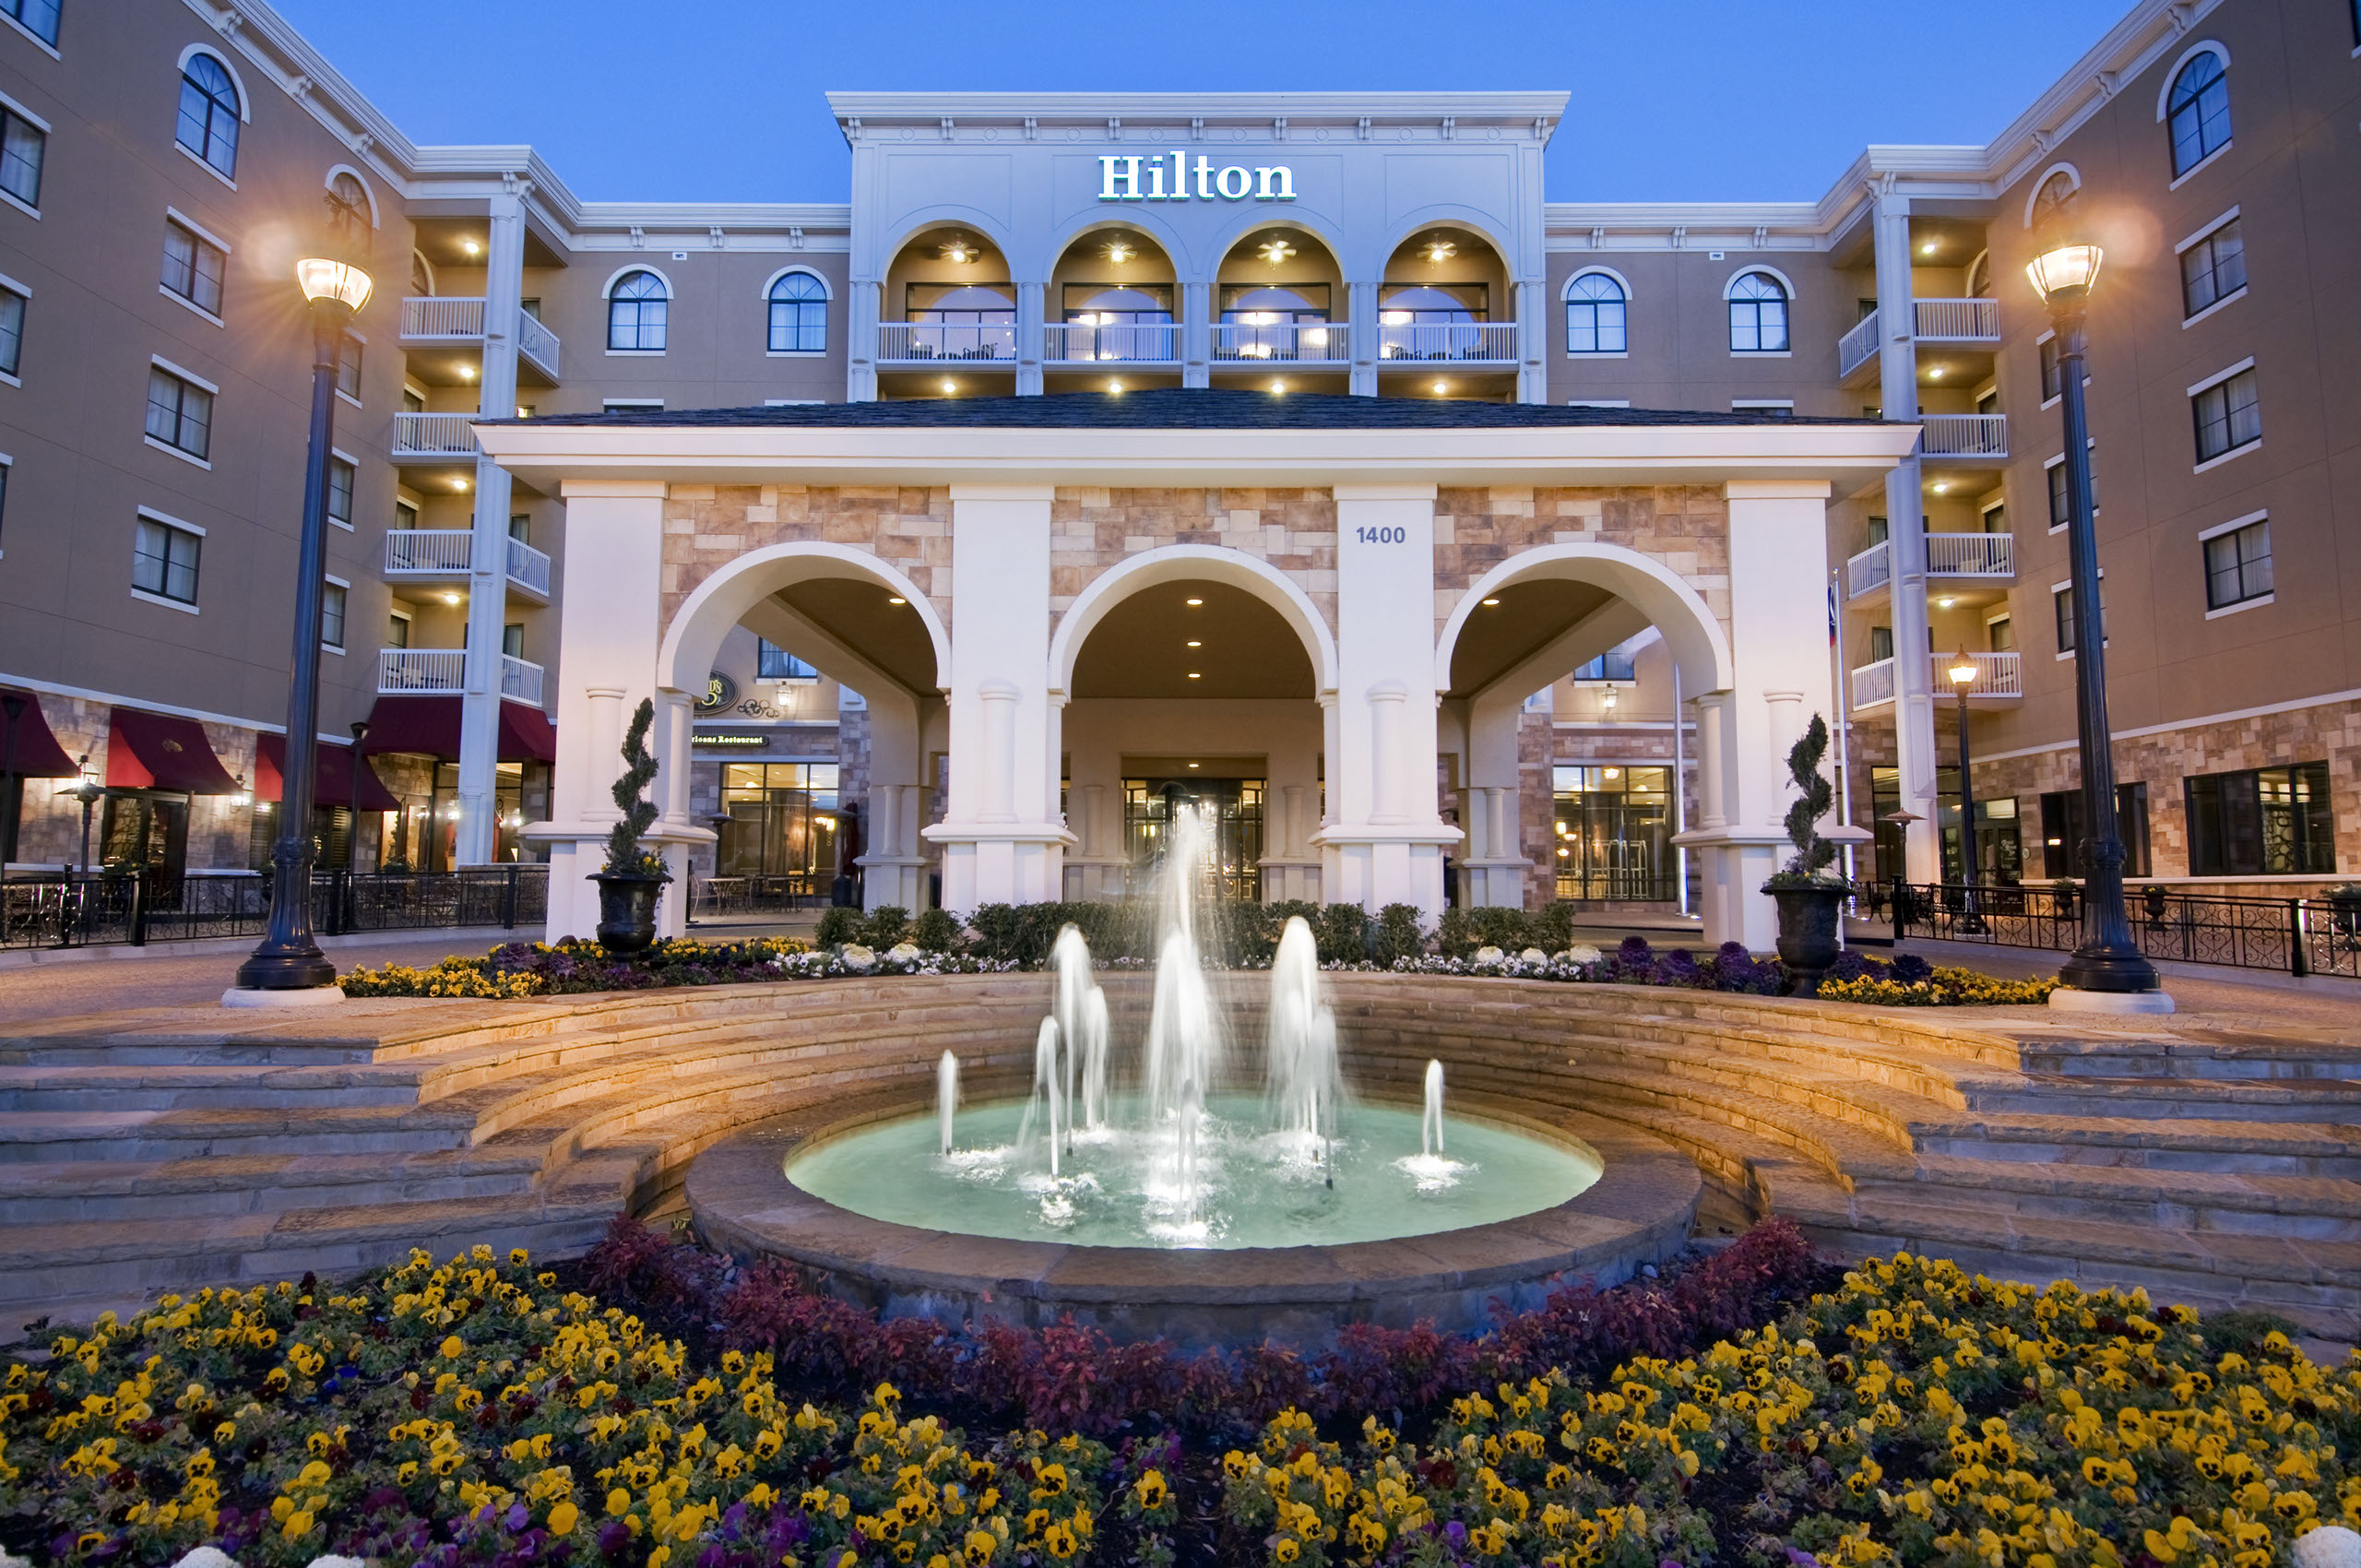                      Amazon Now Lets You Use Hilton Honors Points For Purchases                             
                     